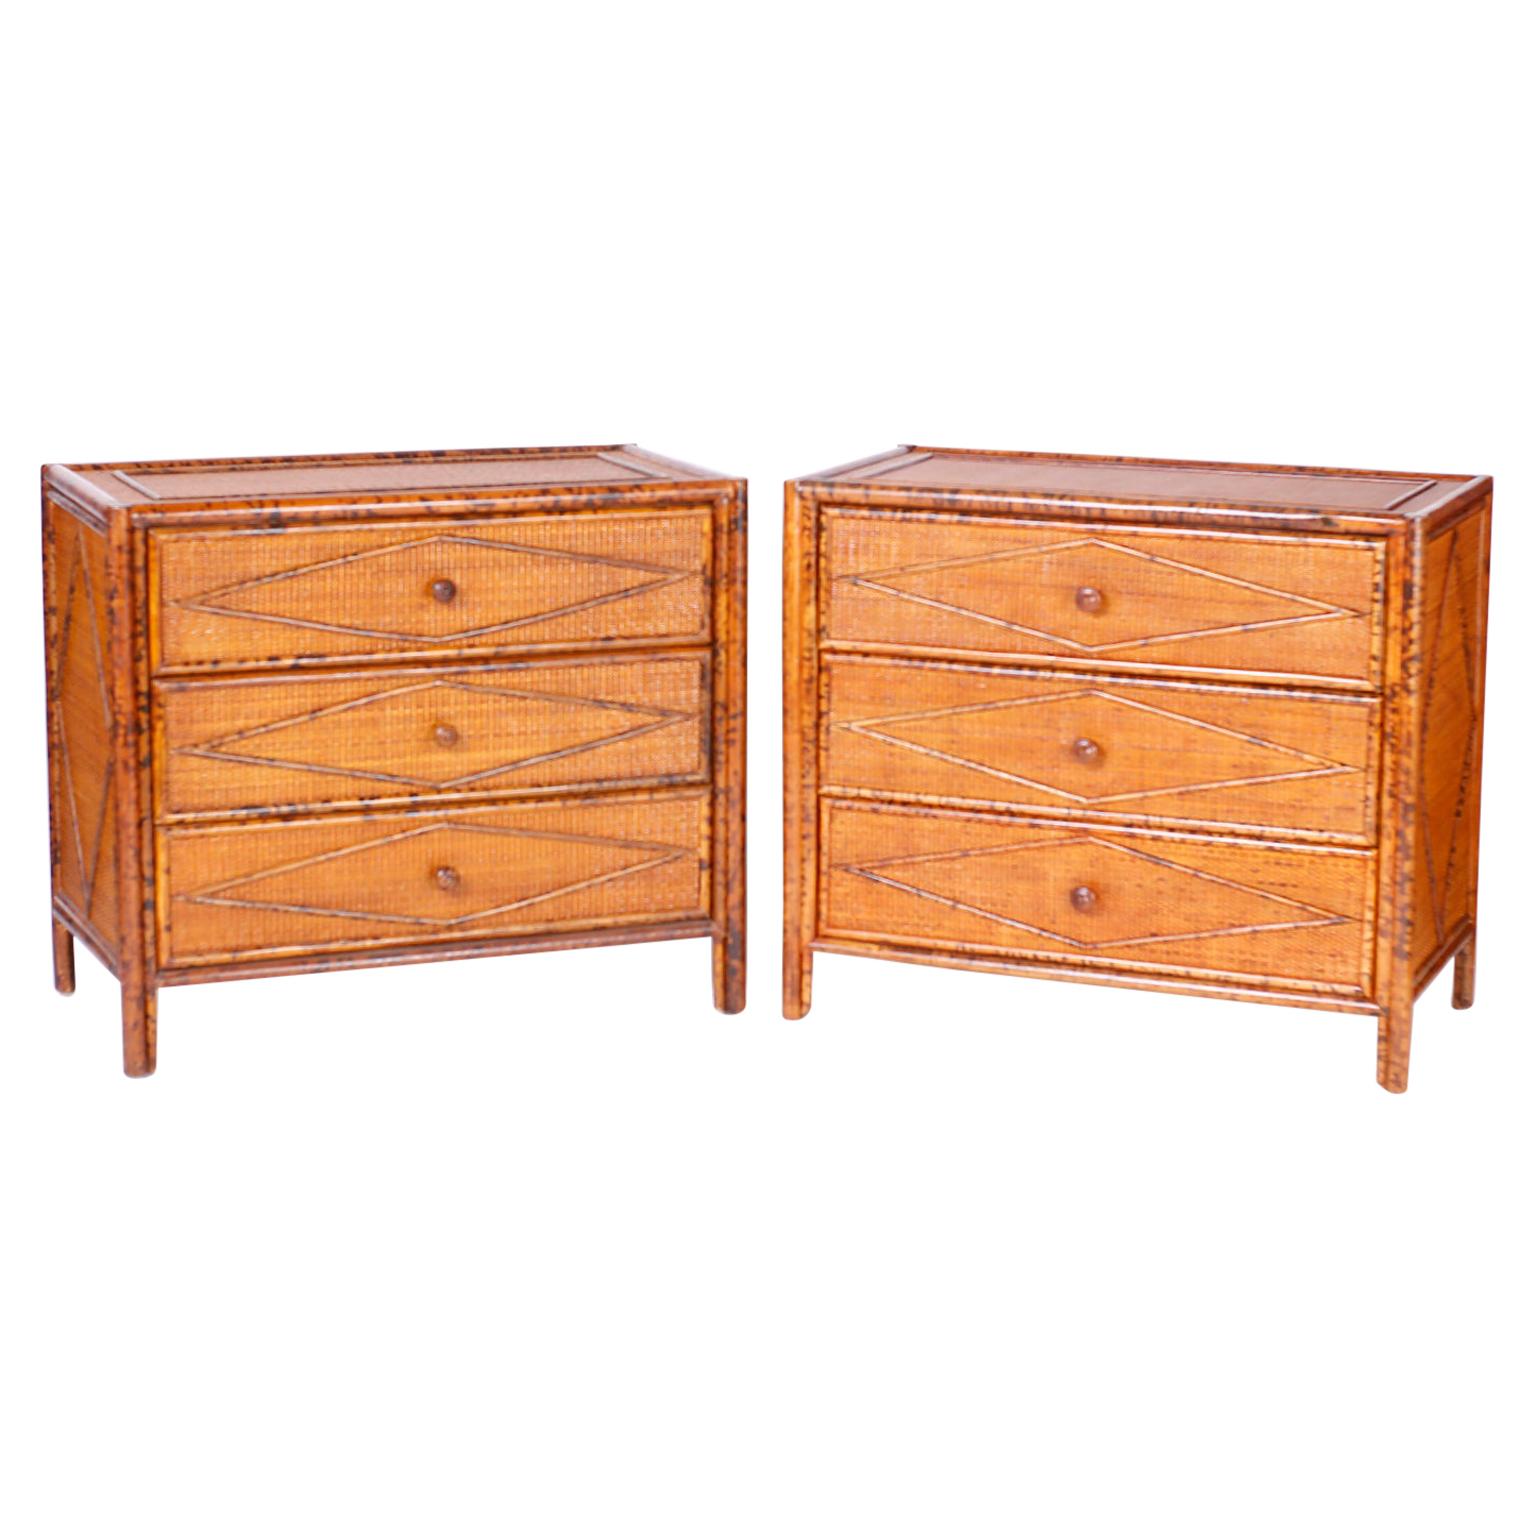 Pair of Faux Burnt Bamboo and Grasscloth Chests or Nightstands